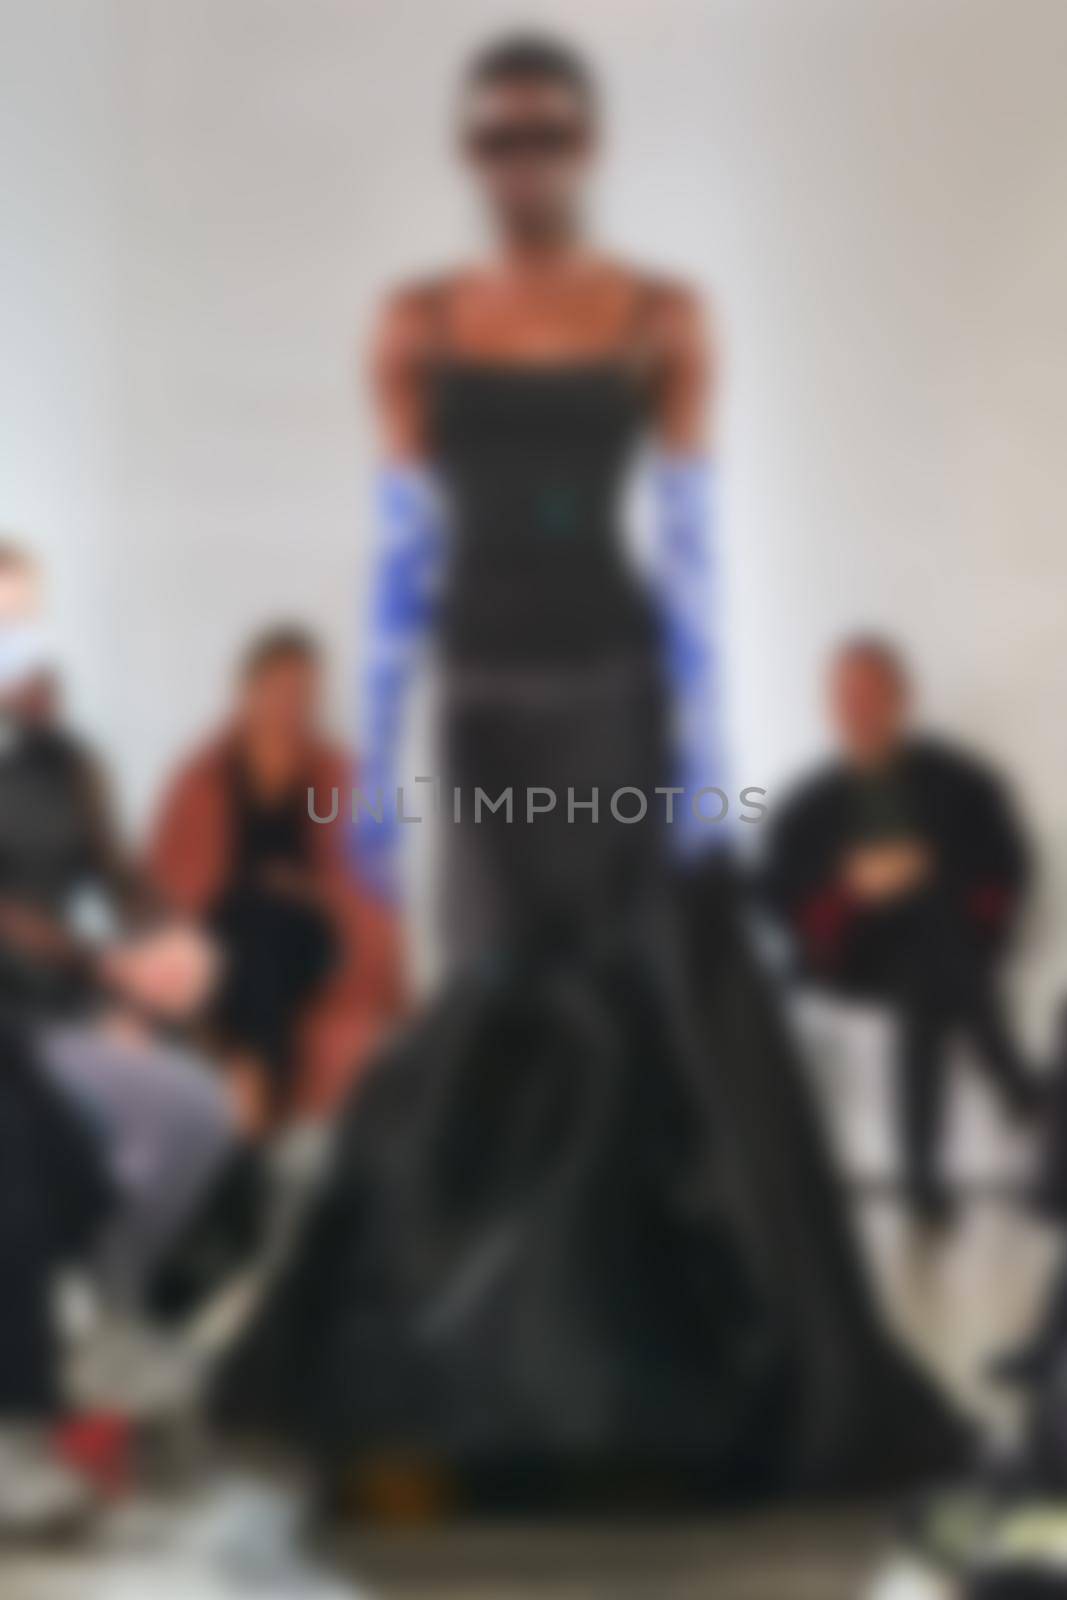 Fashion runway out of focus. The blur background.